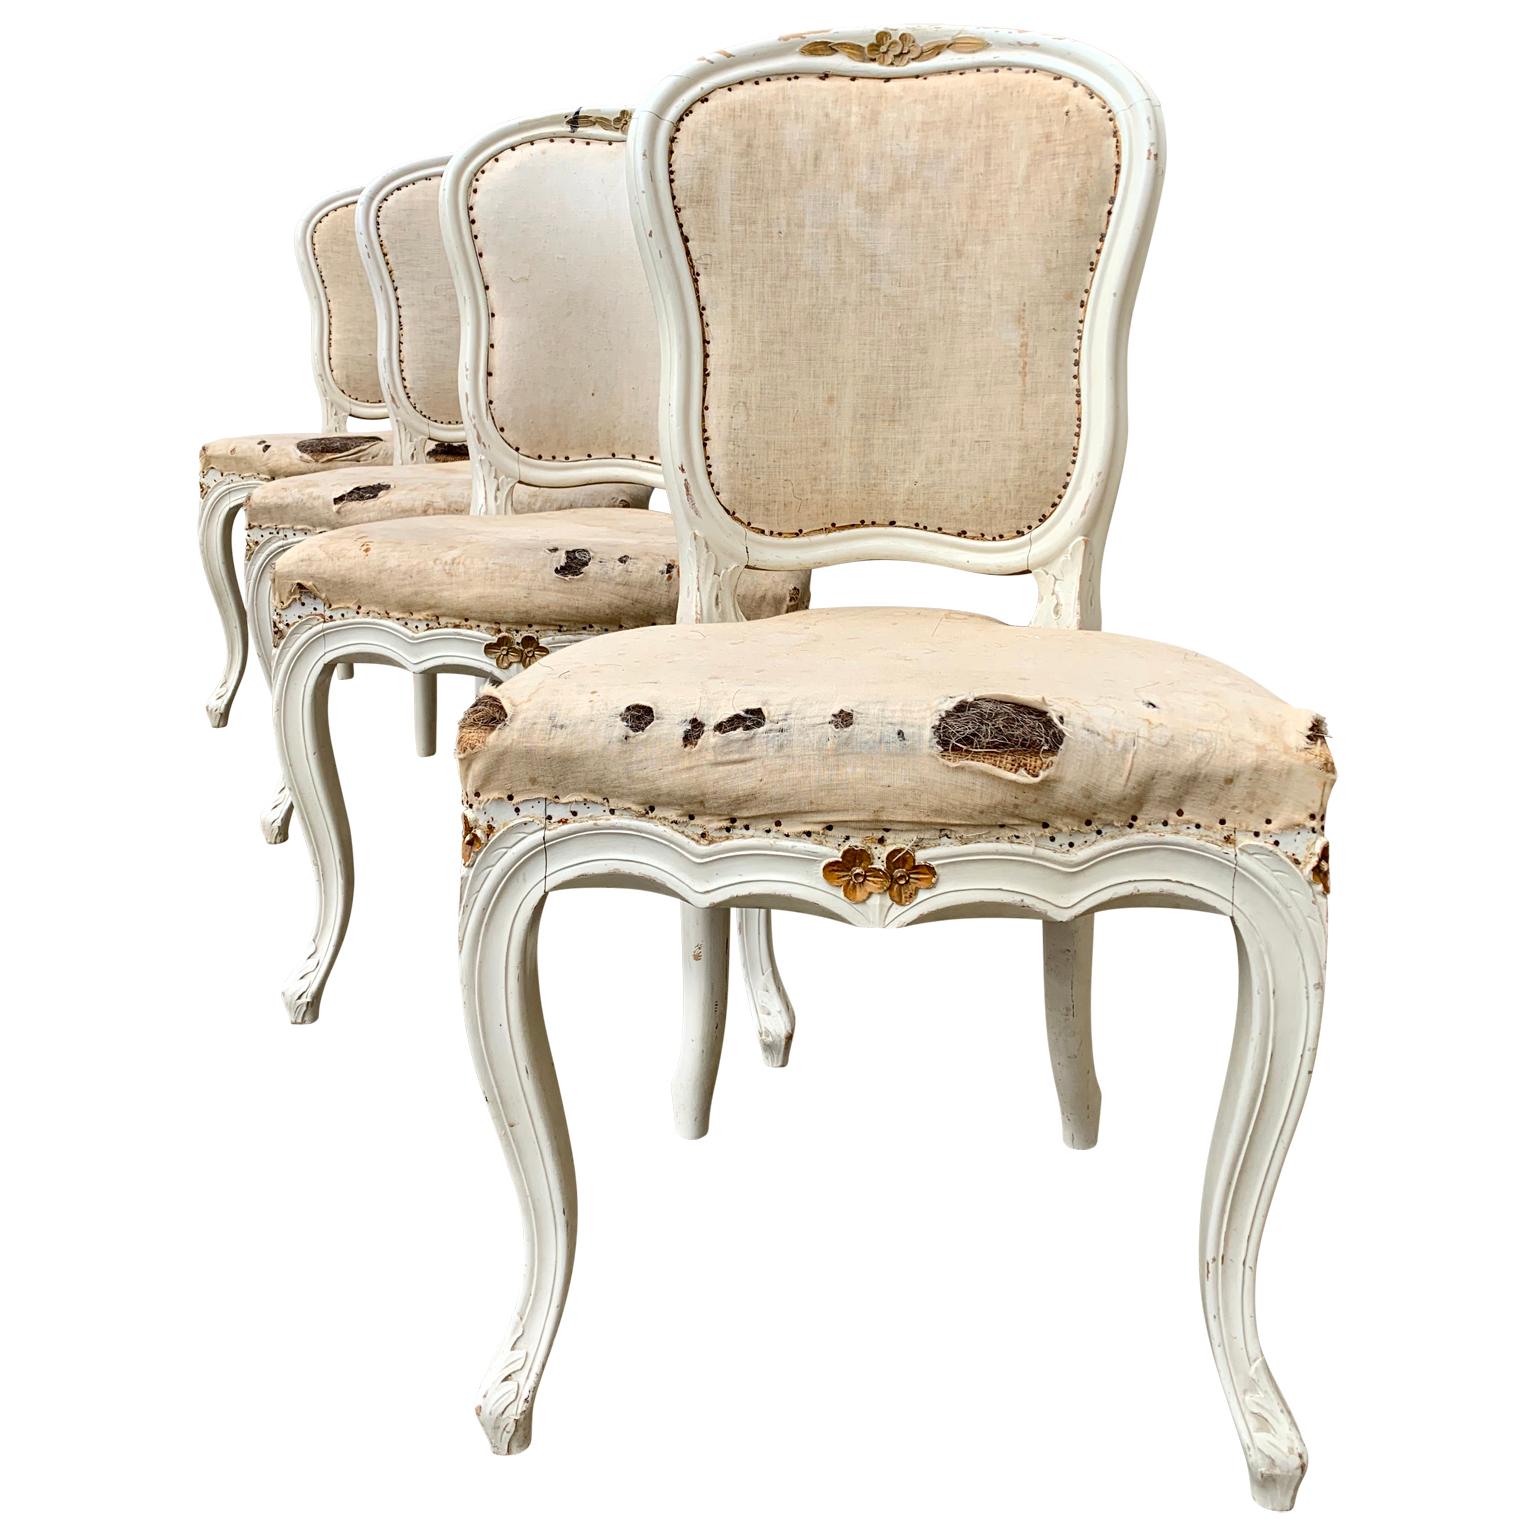 Beech Set of 4 Swedish White Painted 19th Century Rococo Style Chairs